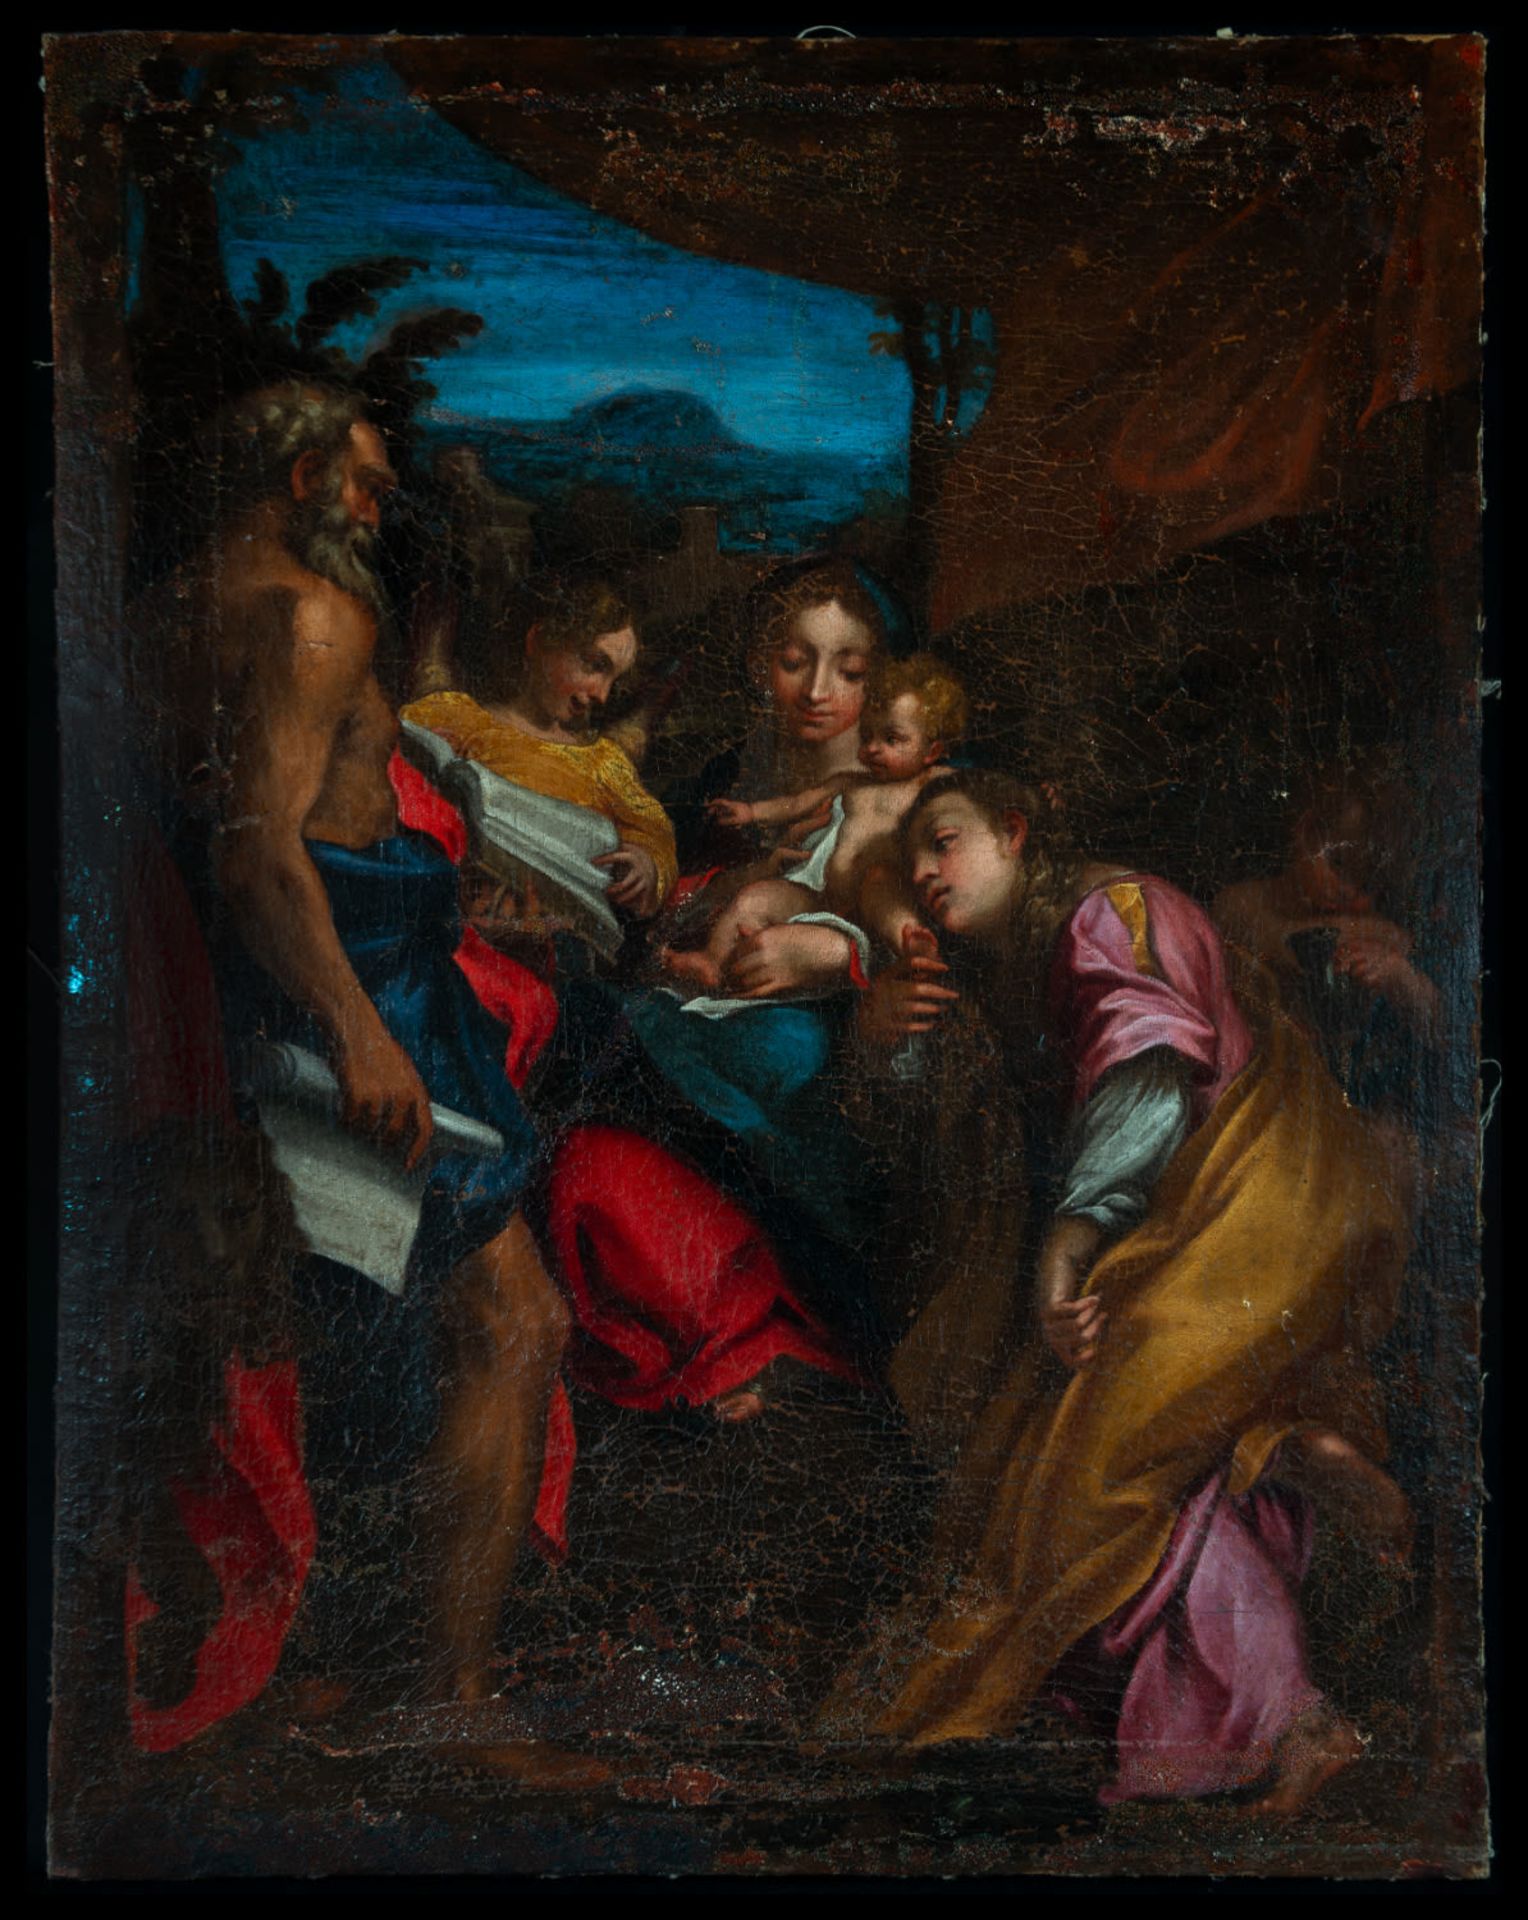 Antique Italian School - Virgin Mary with Saint Catherine and Saint Jerome, late 16th century to ear